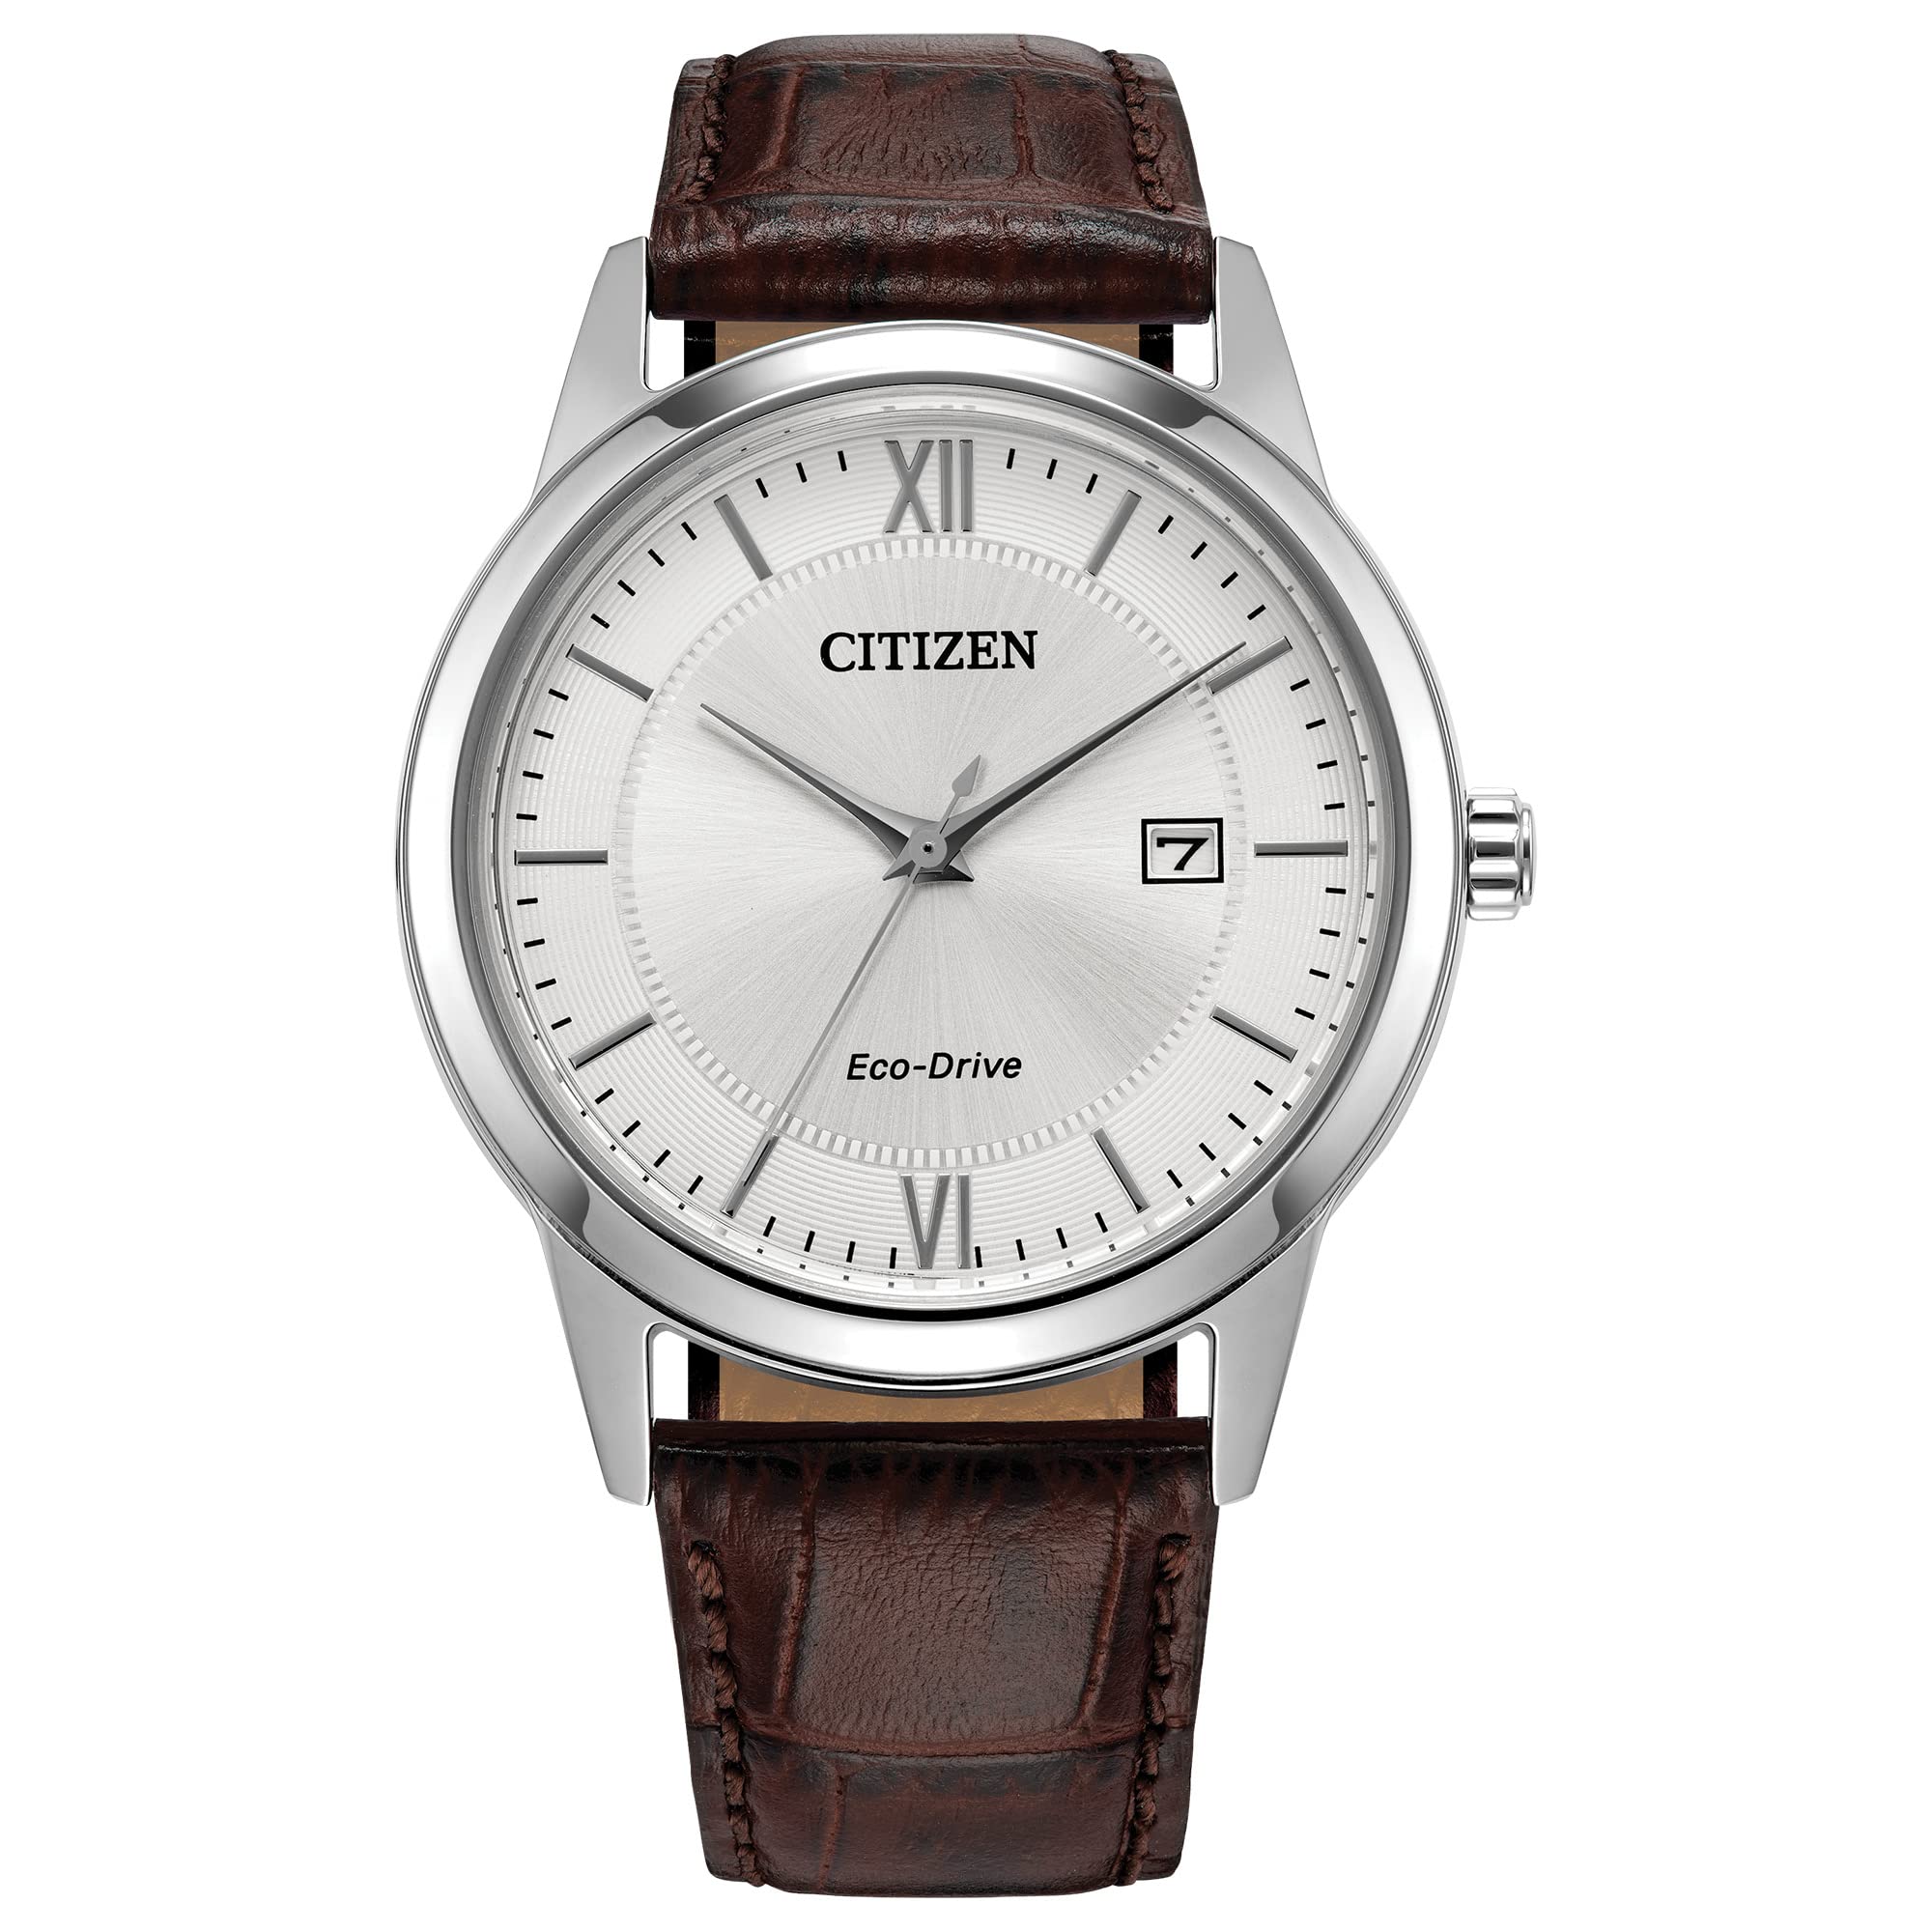 Citizen Men's Classic Eco-Drive Leather Strap Watch, 3-Hand Date